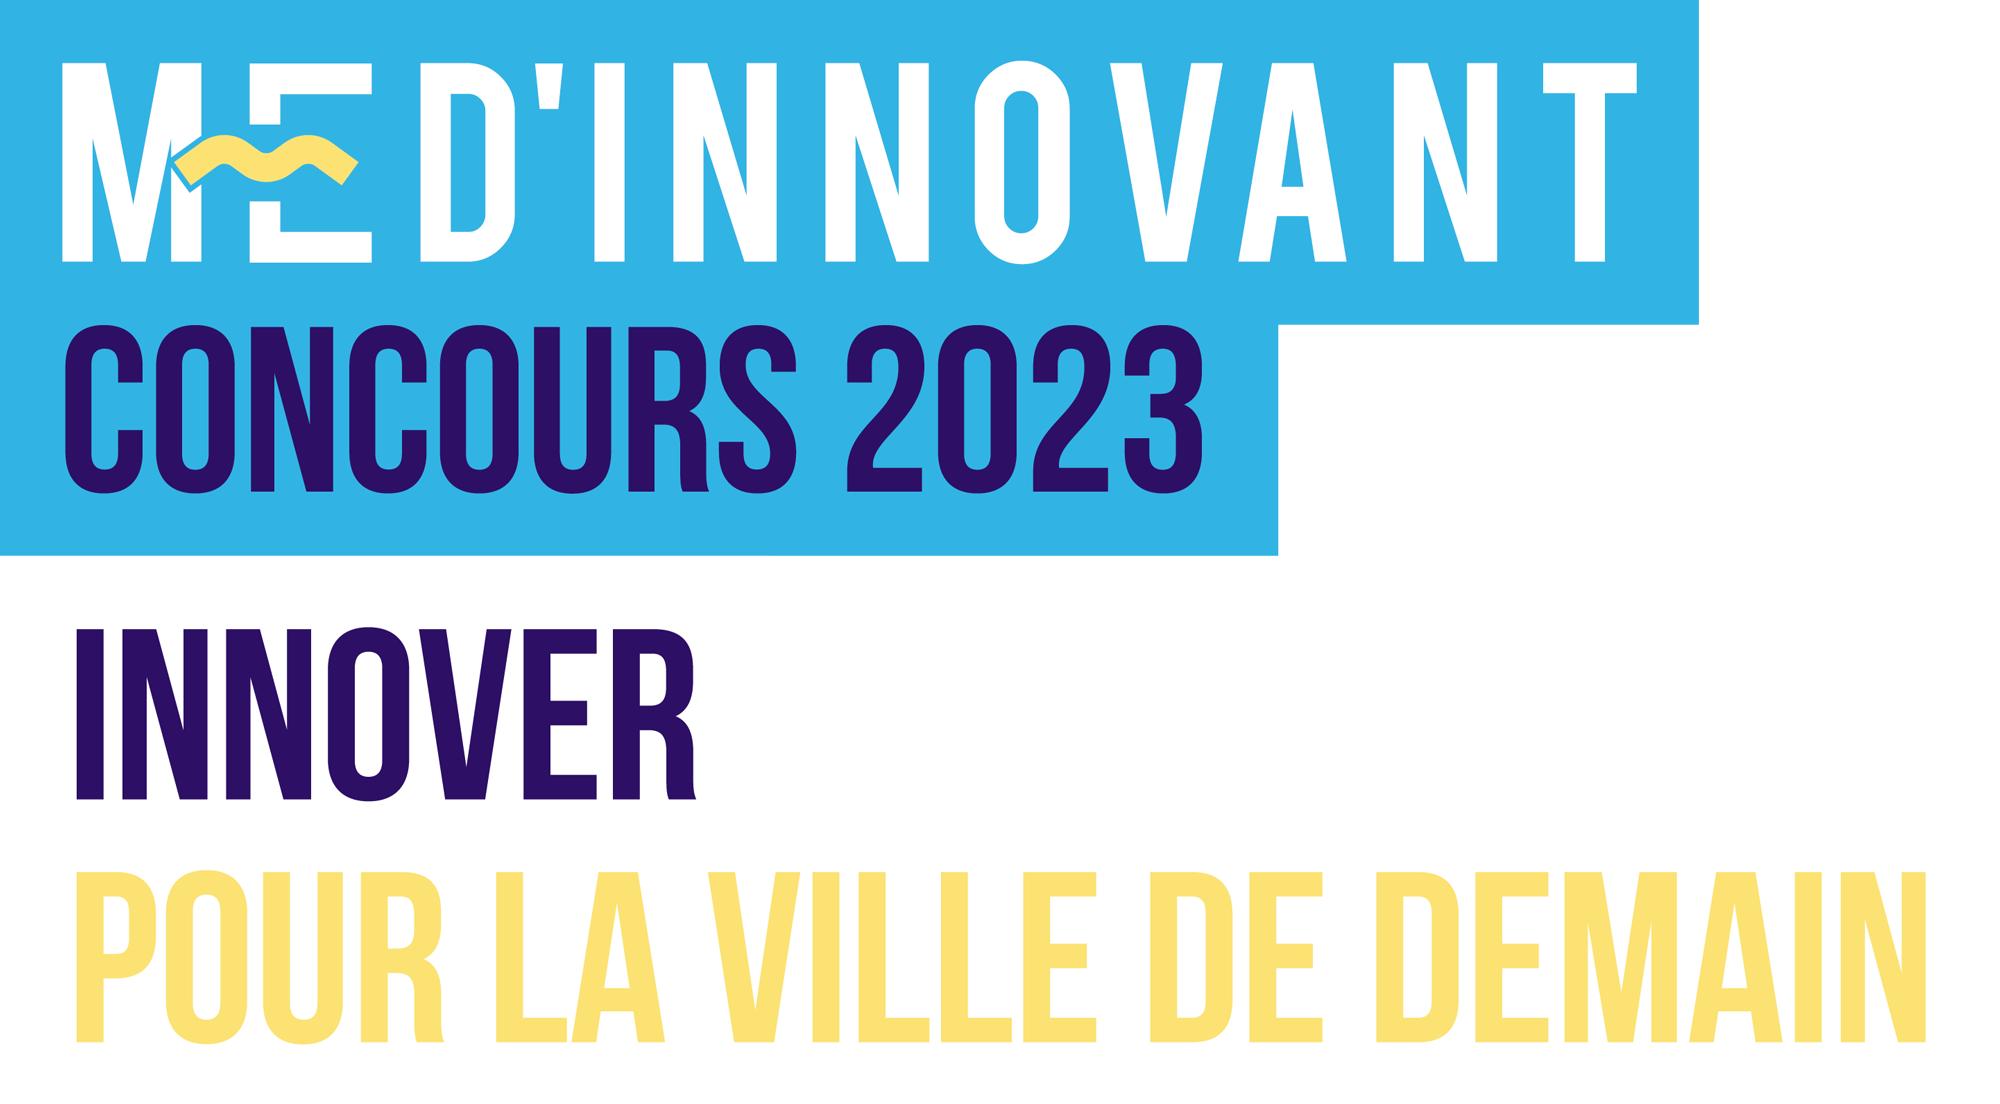 Concours MED’INNOVANT 2023